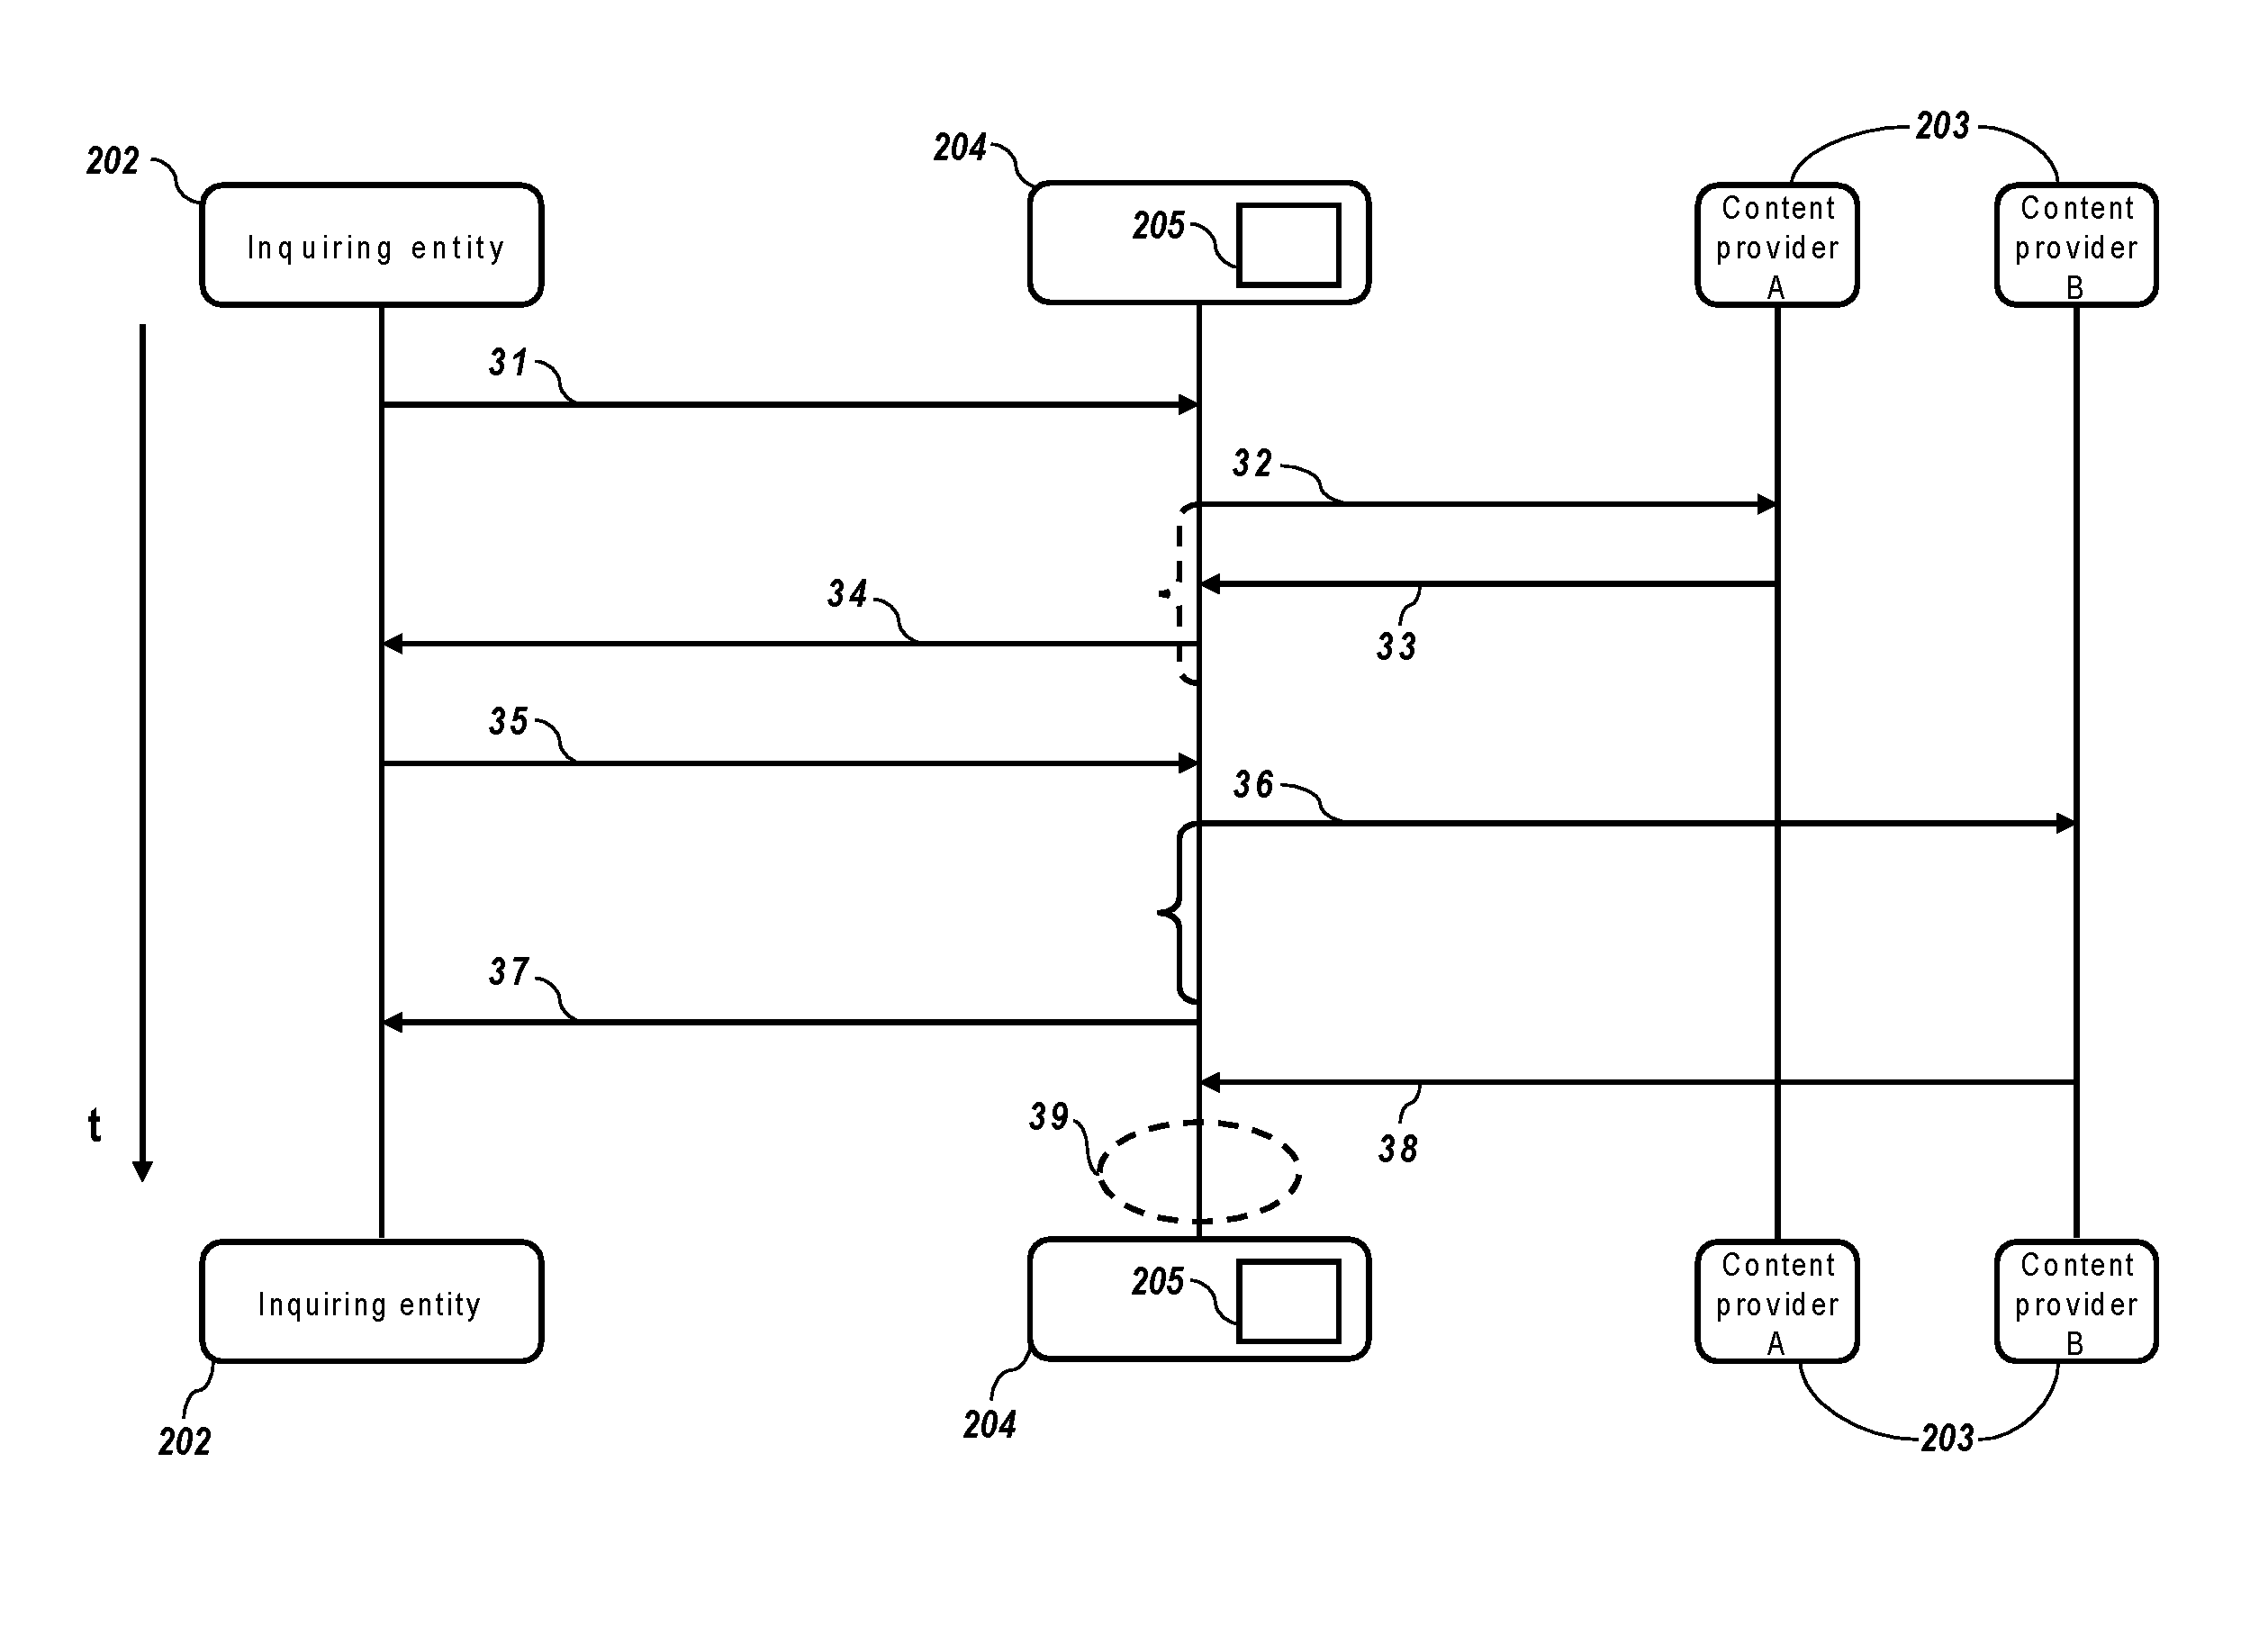 Processing information queries in a distributed information processing environment